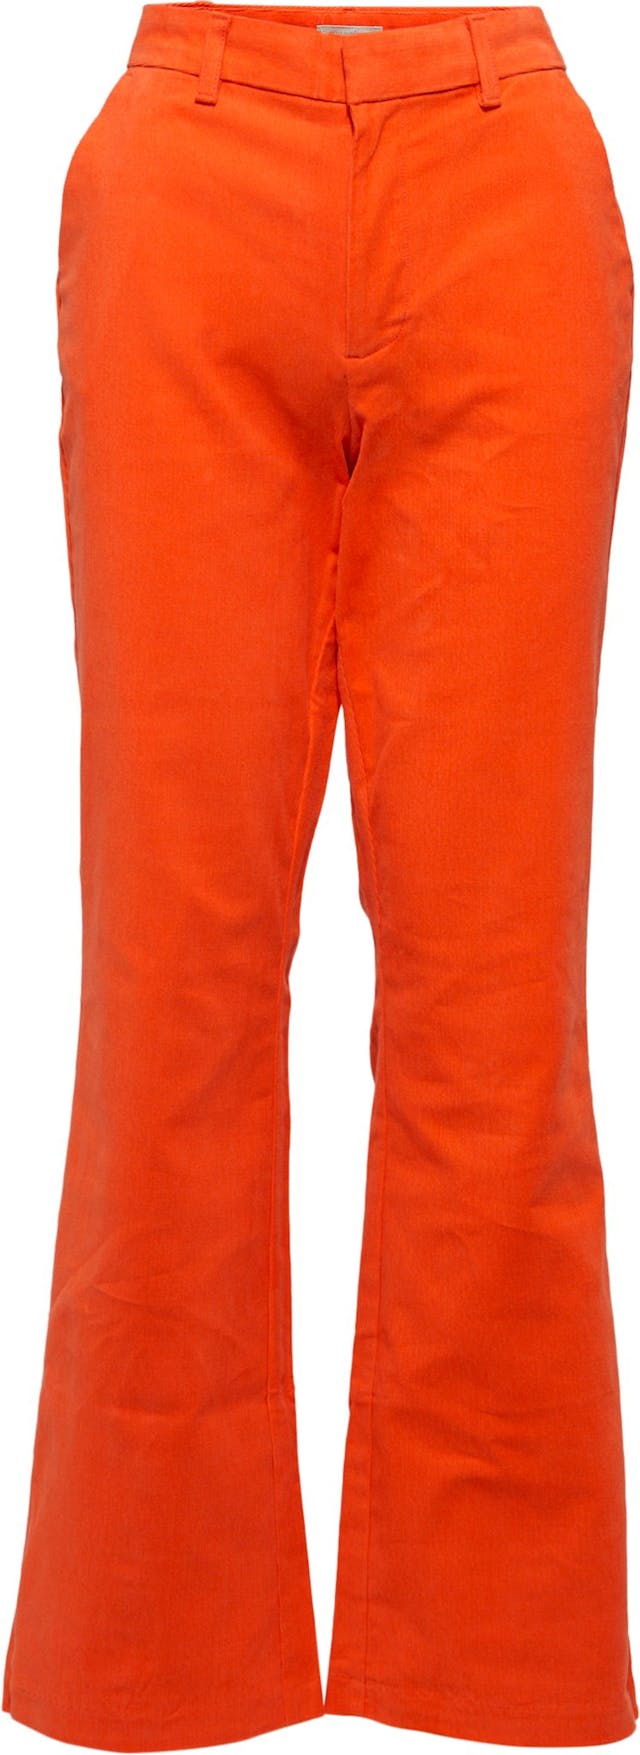 Product image for Avery Cord Trousers - Women's